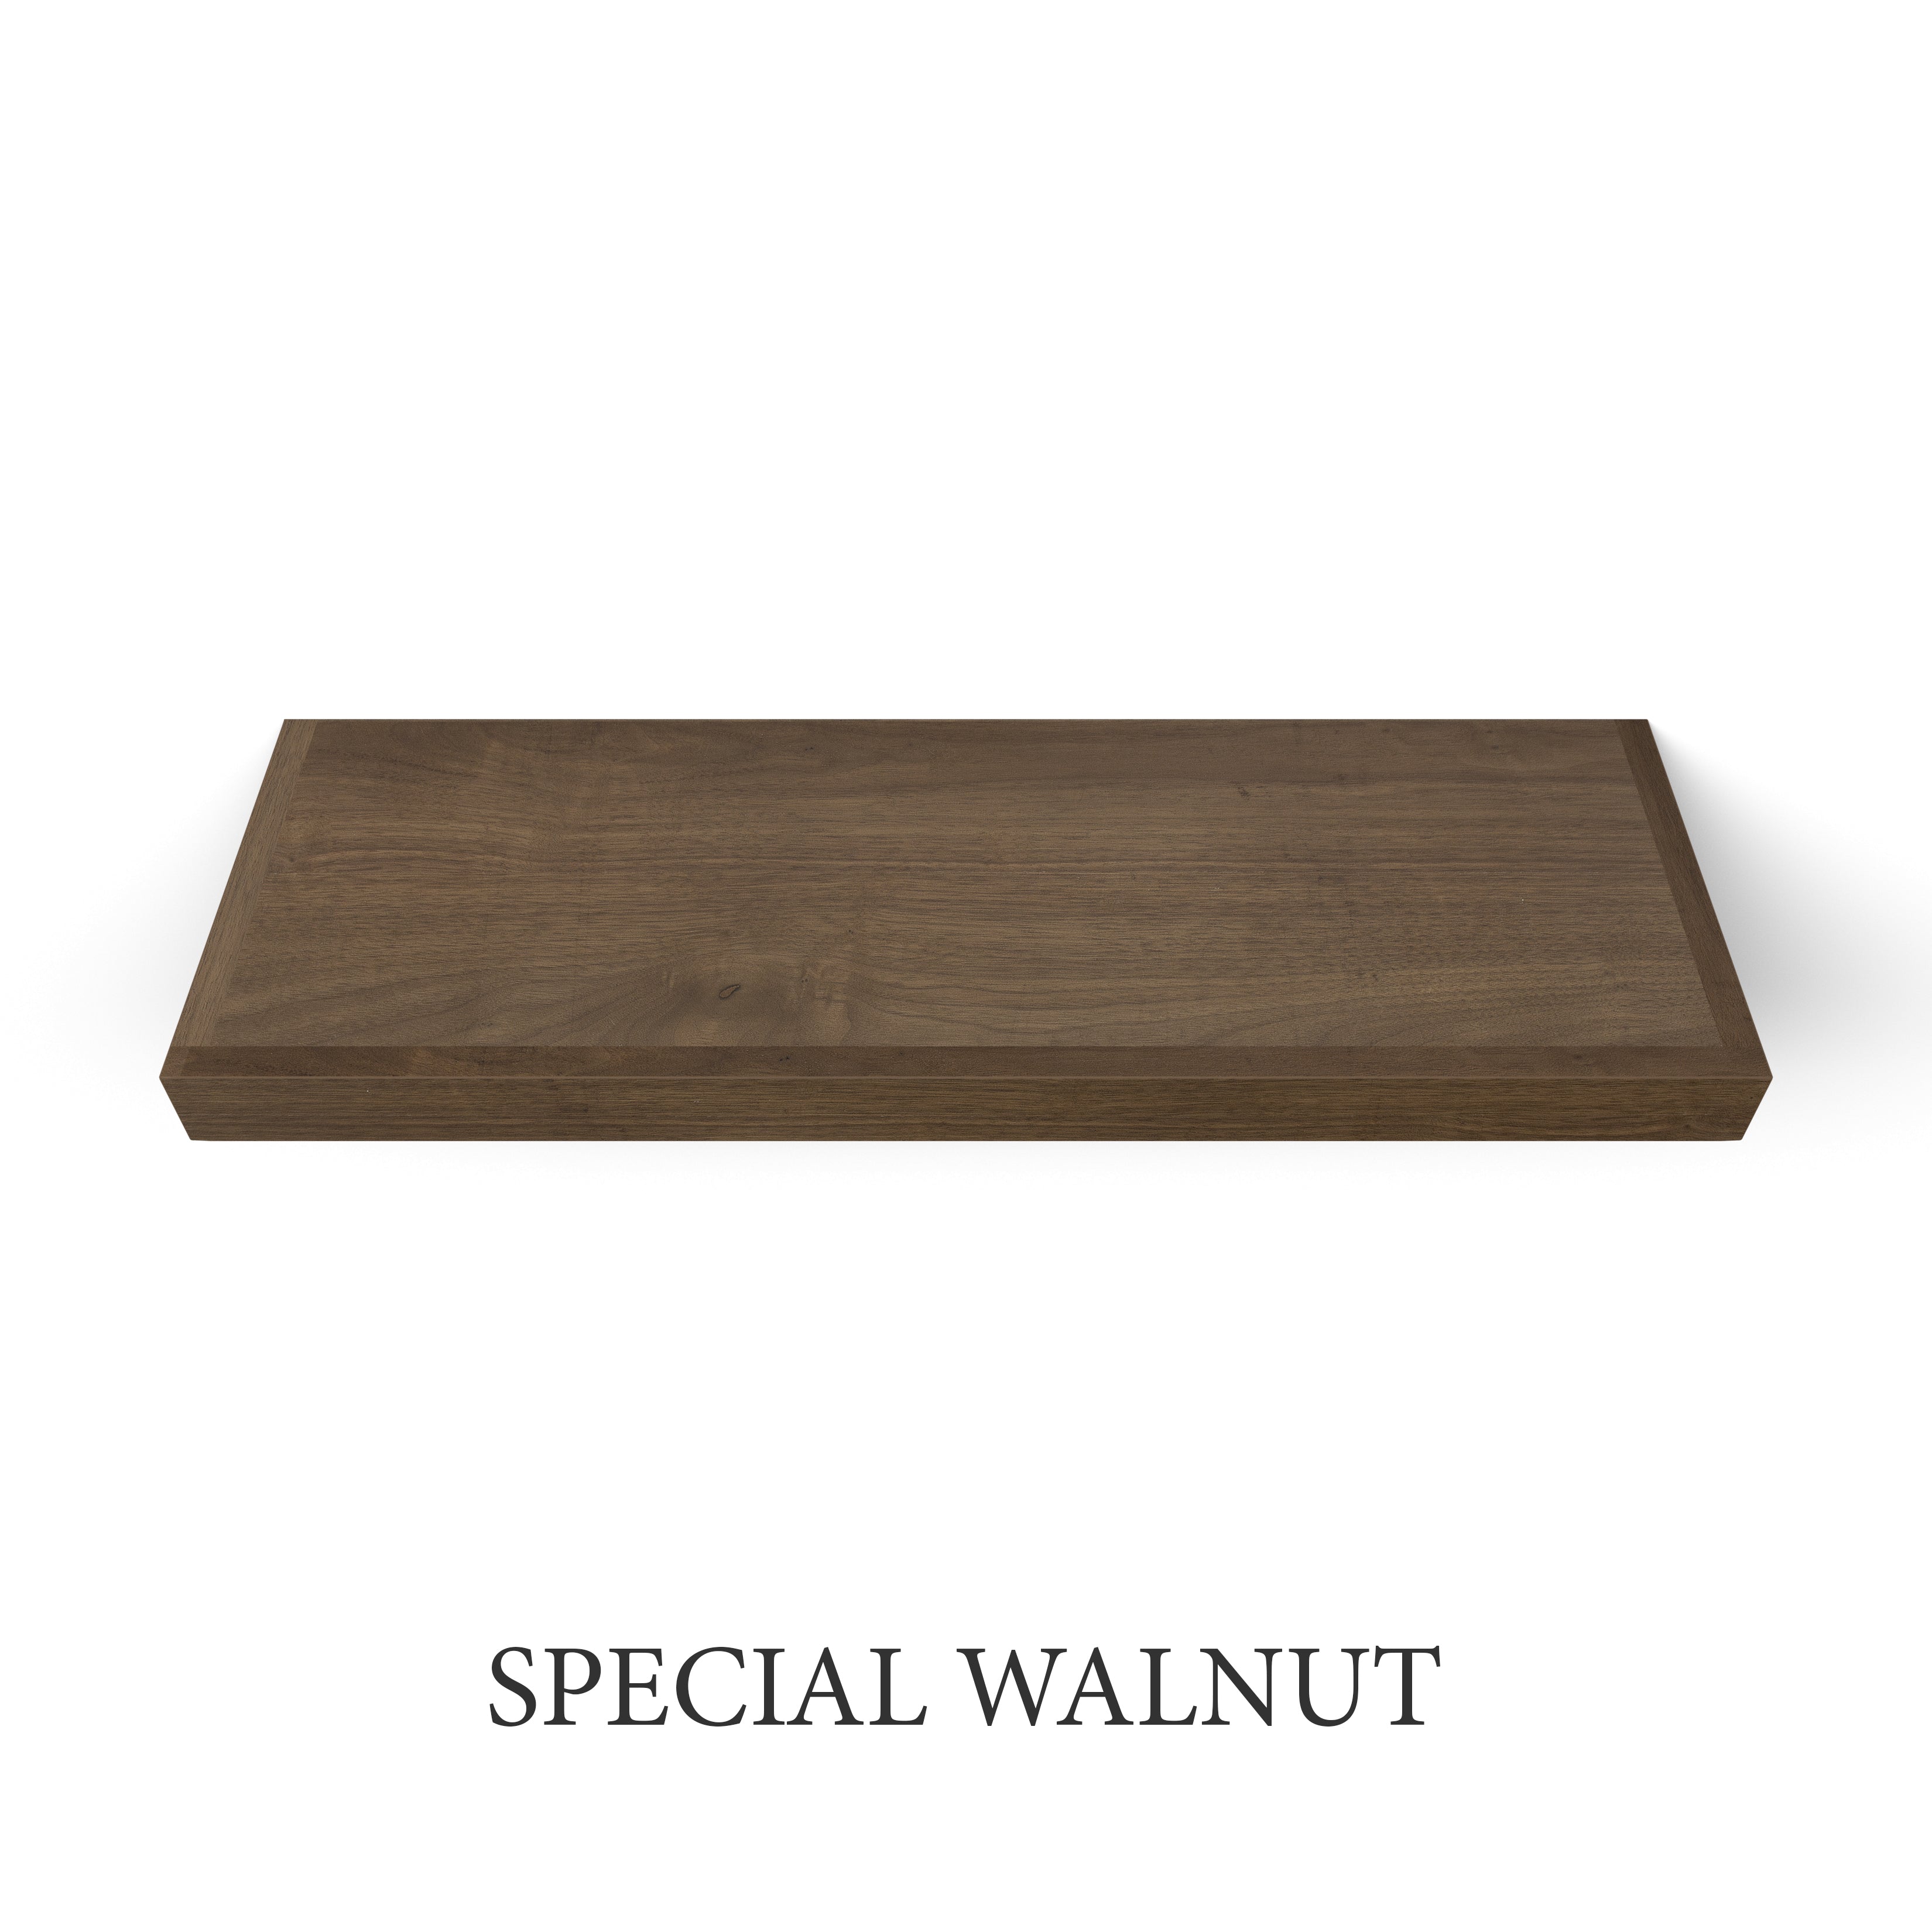 special walnut Walnut 2 Inch Thick LED Lighted Floating Shelf - Battery